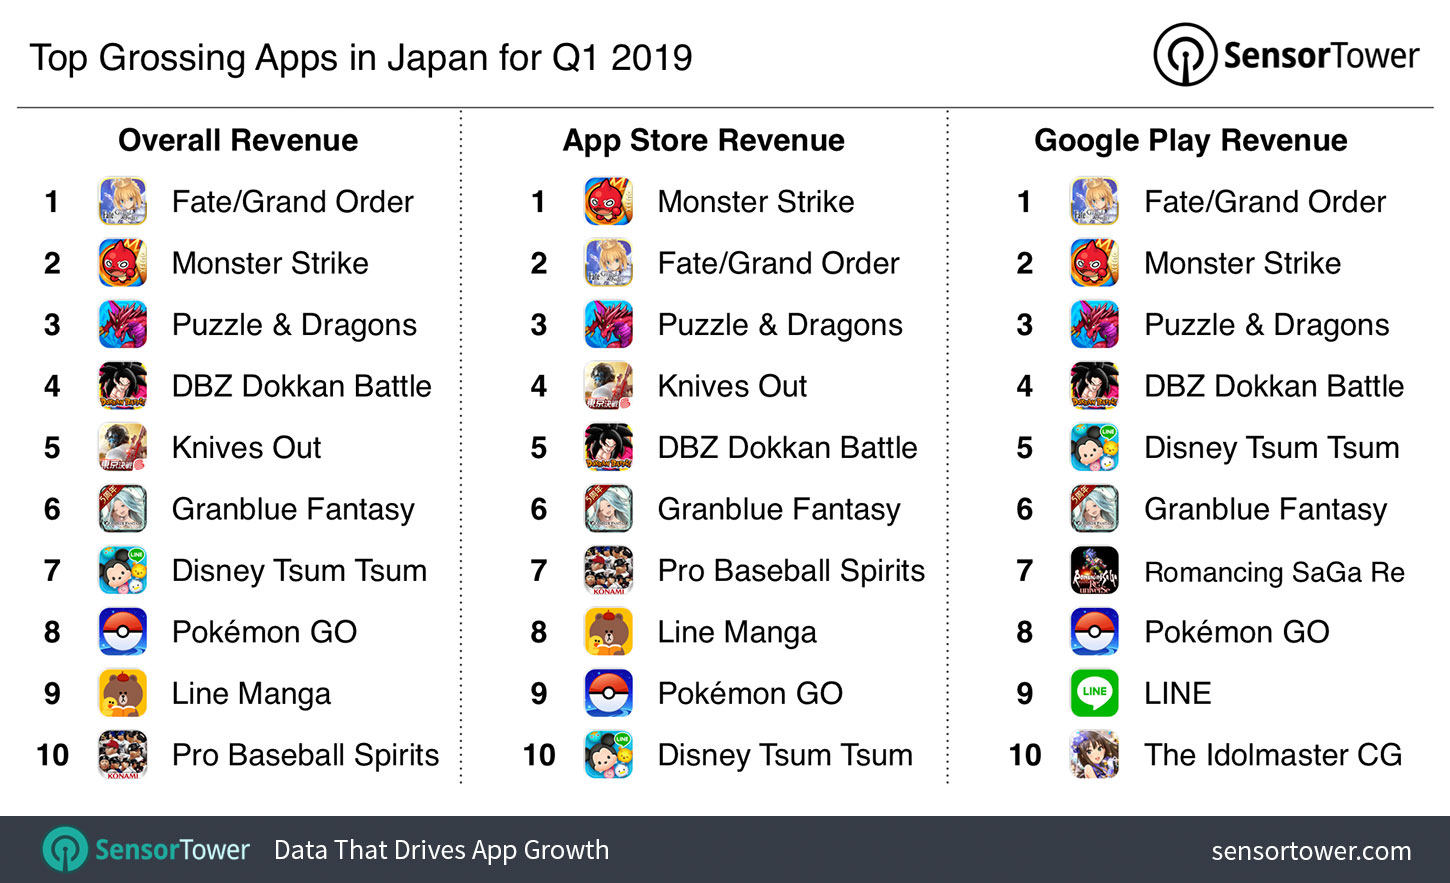 Top Grossing Apps in Japan for Q1 2019